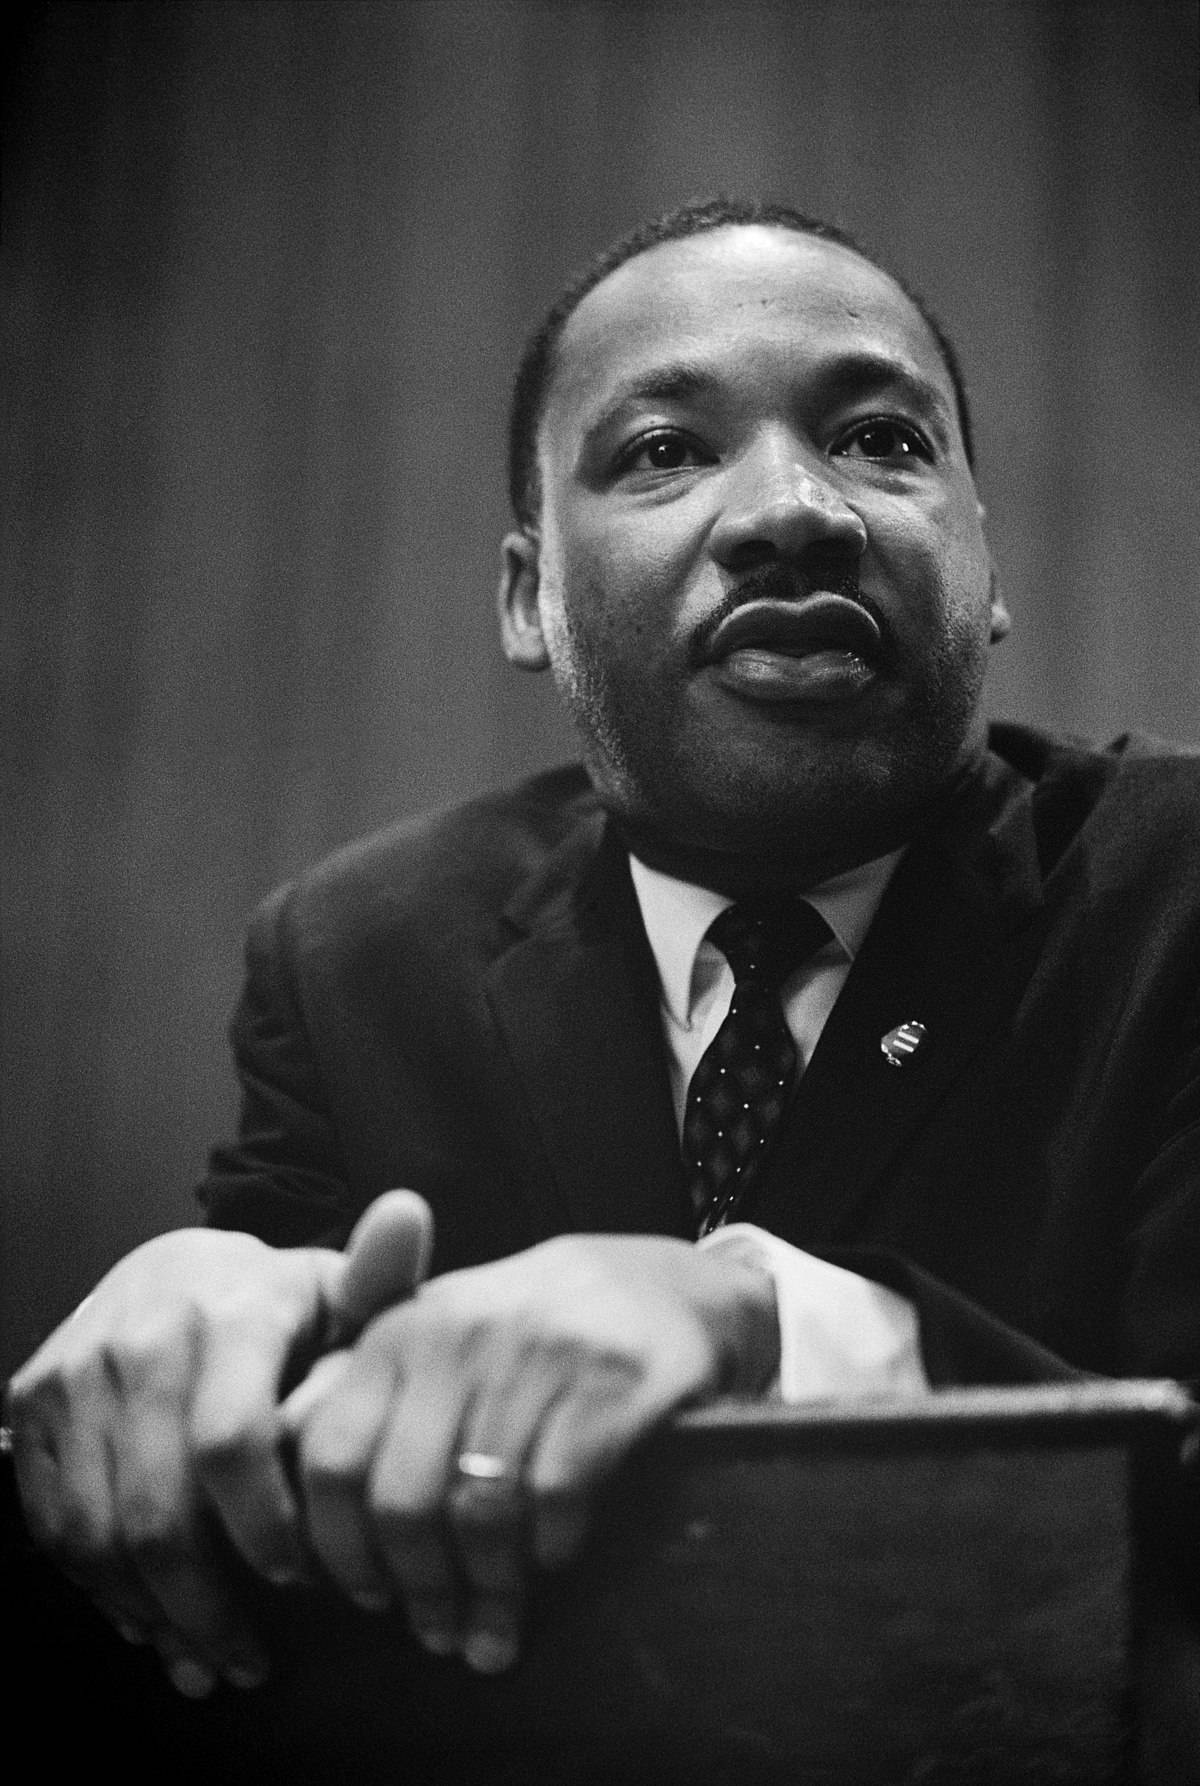 Martin Luther King Jr. Speaking Passionately At A Public Event